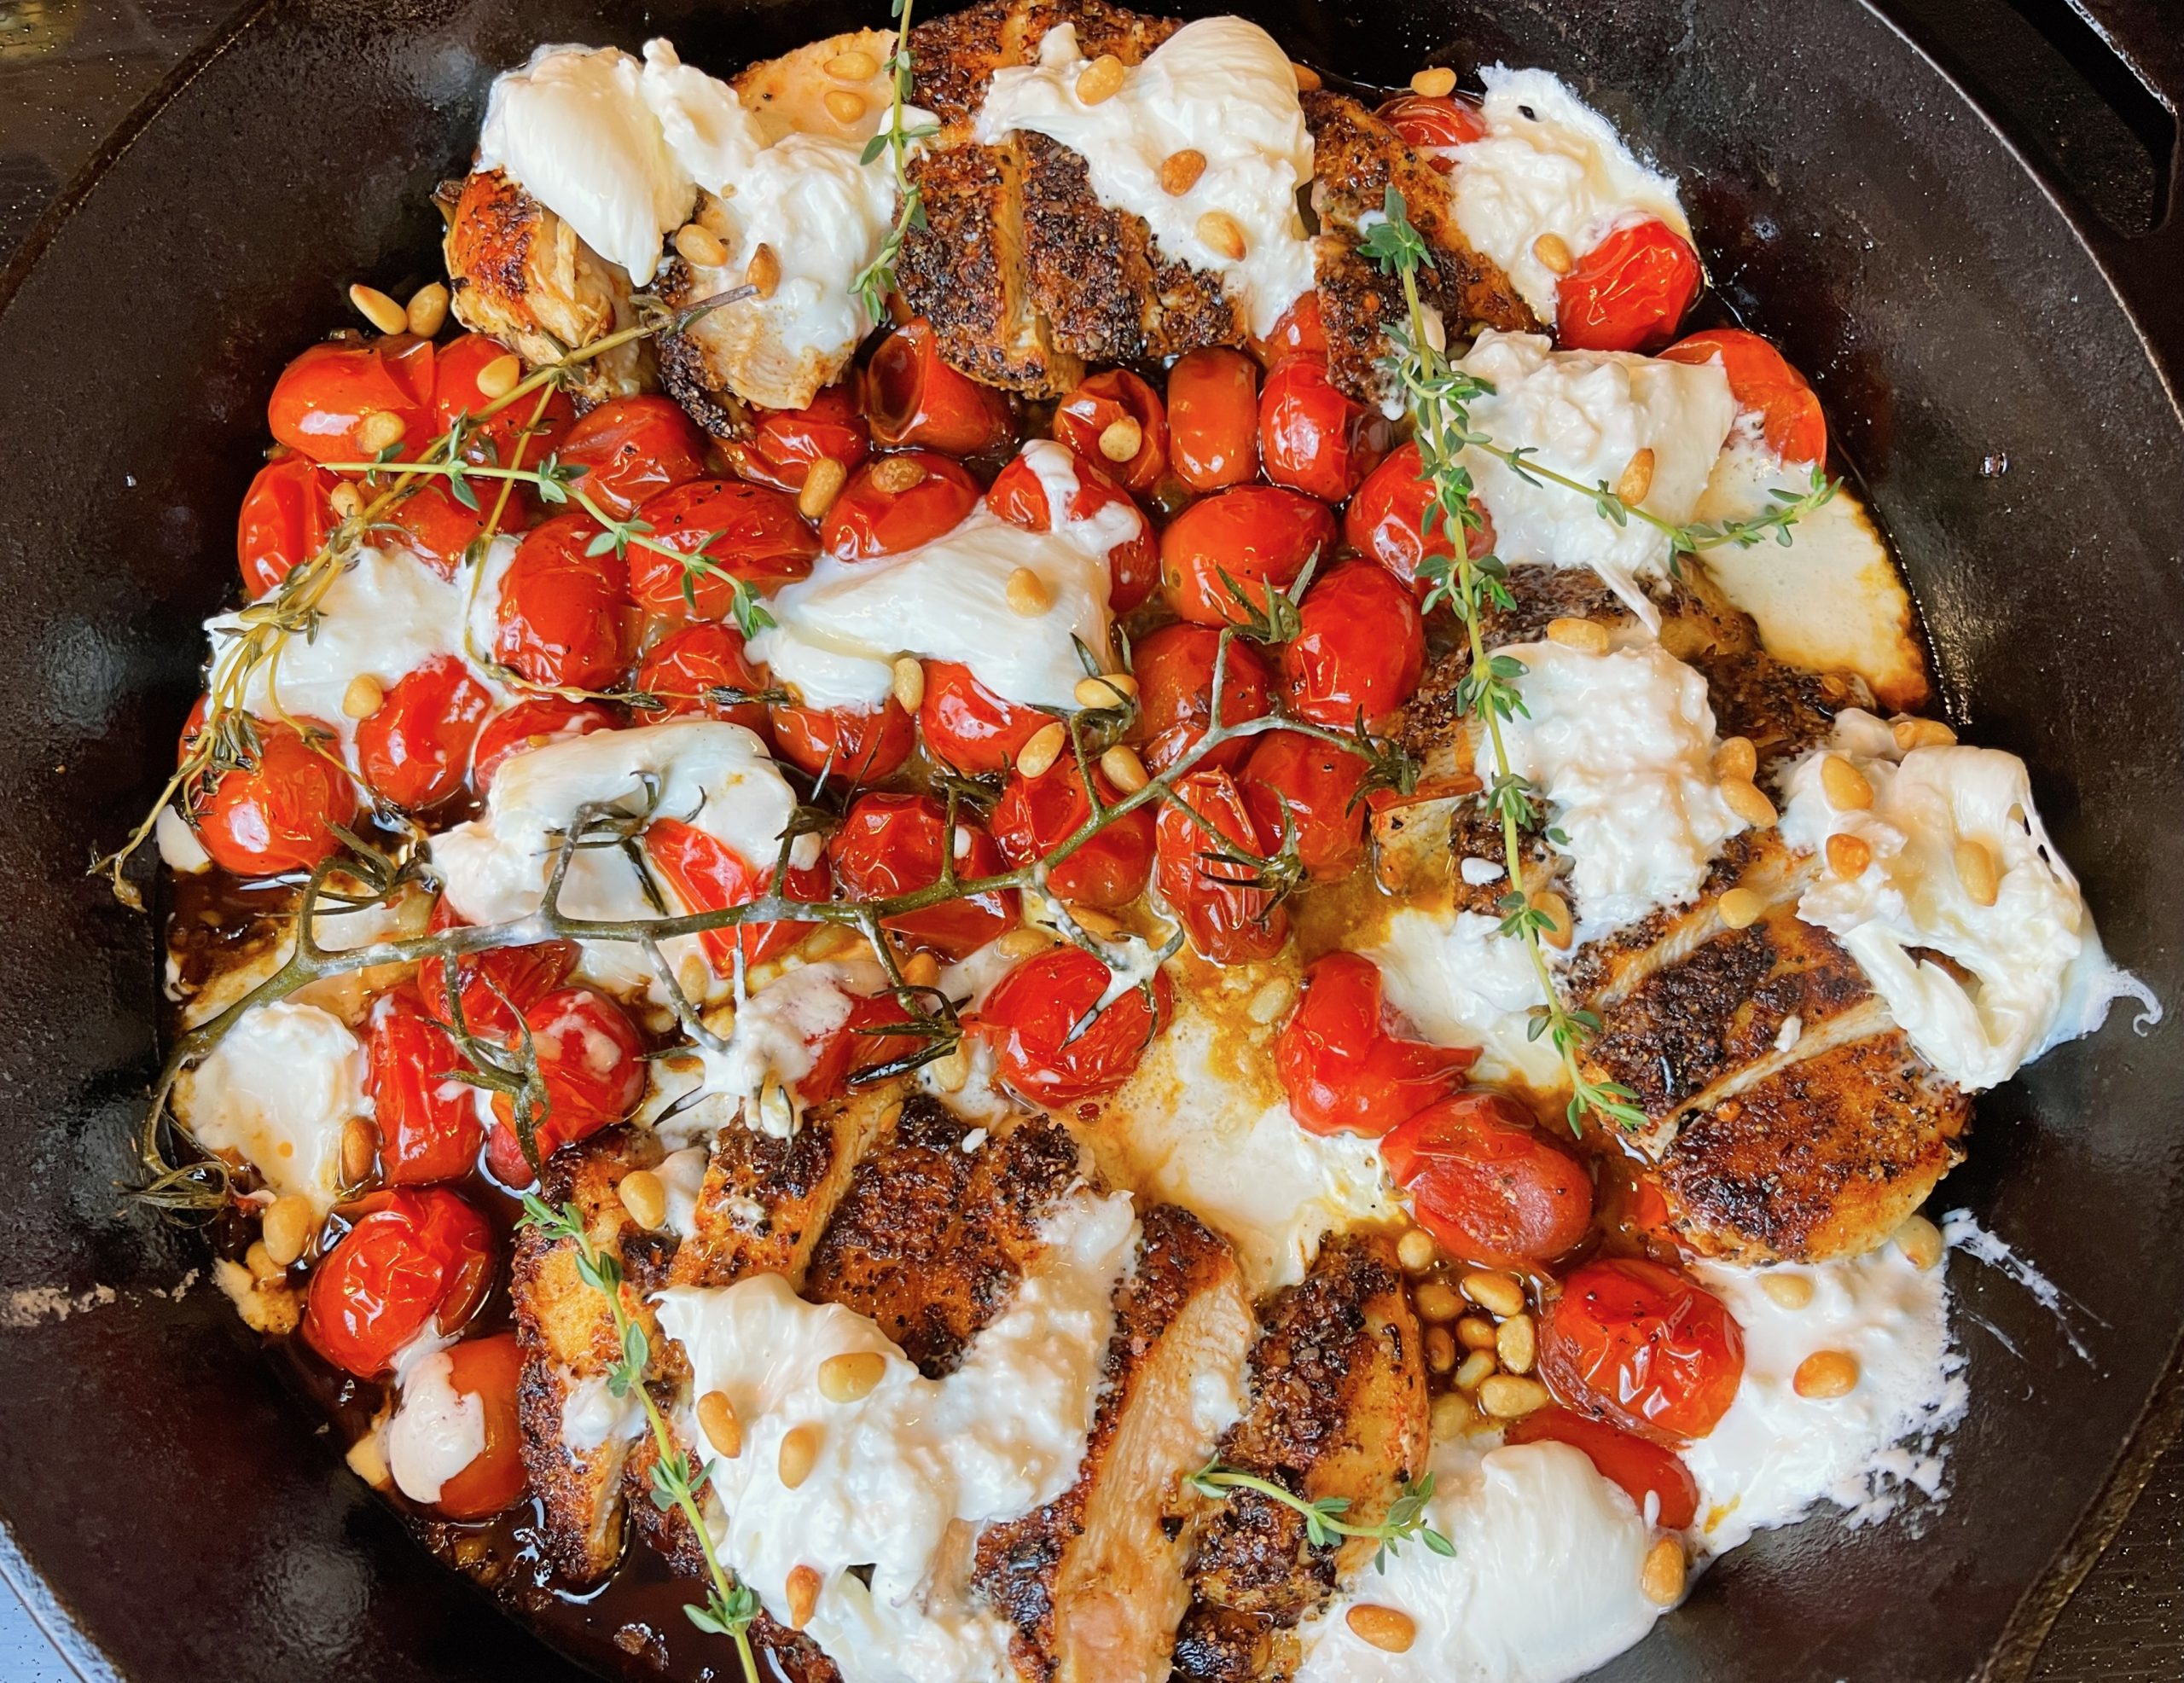 Balsamic Chicken with Blistered Tomatoes and Burrata